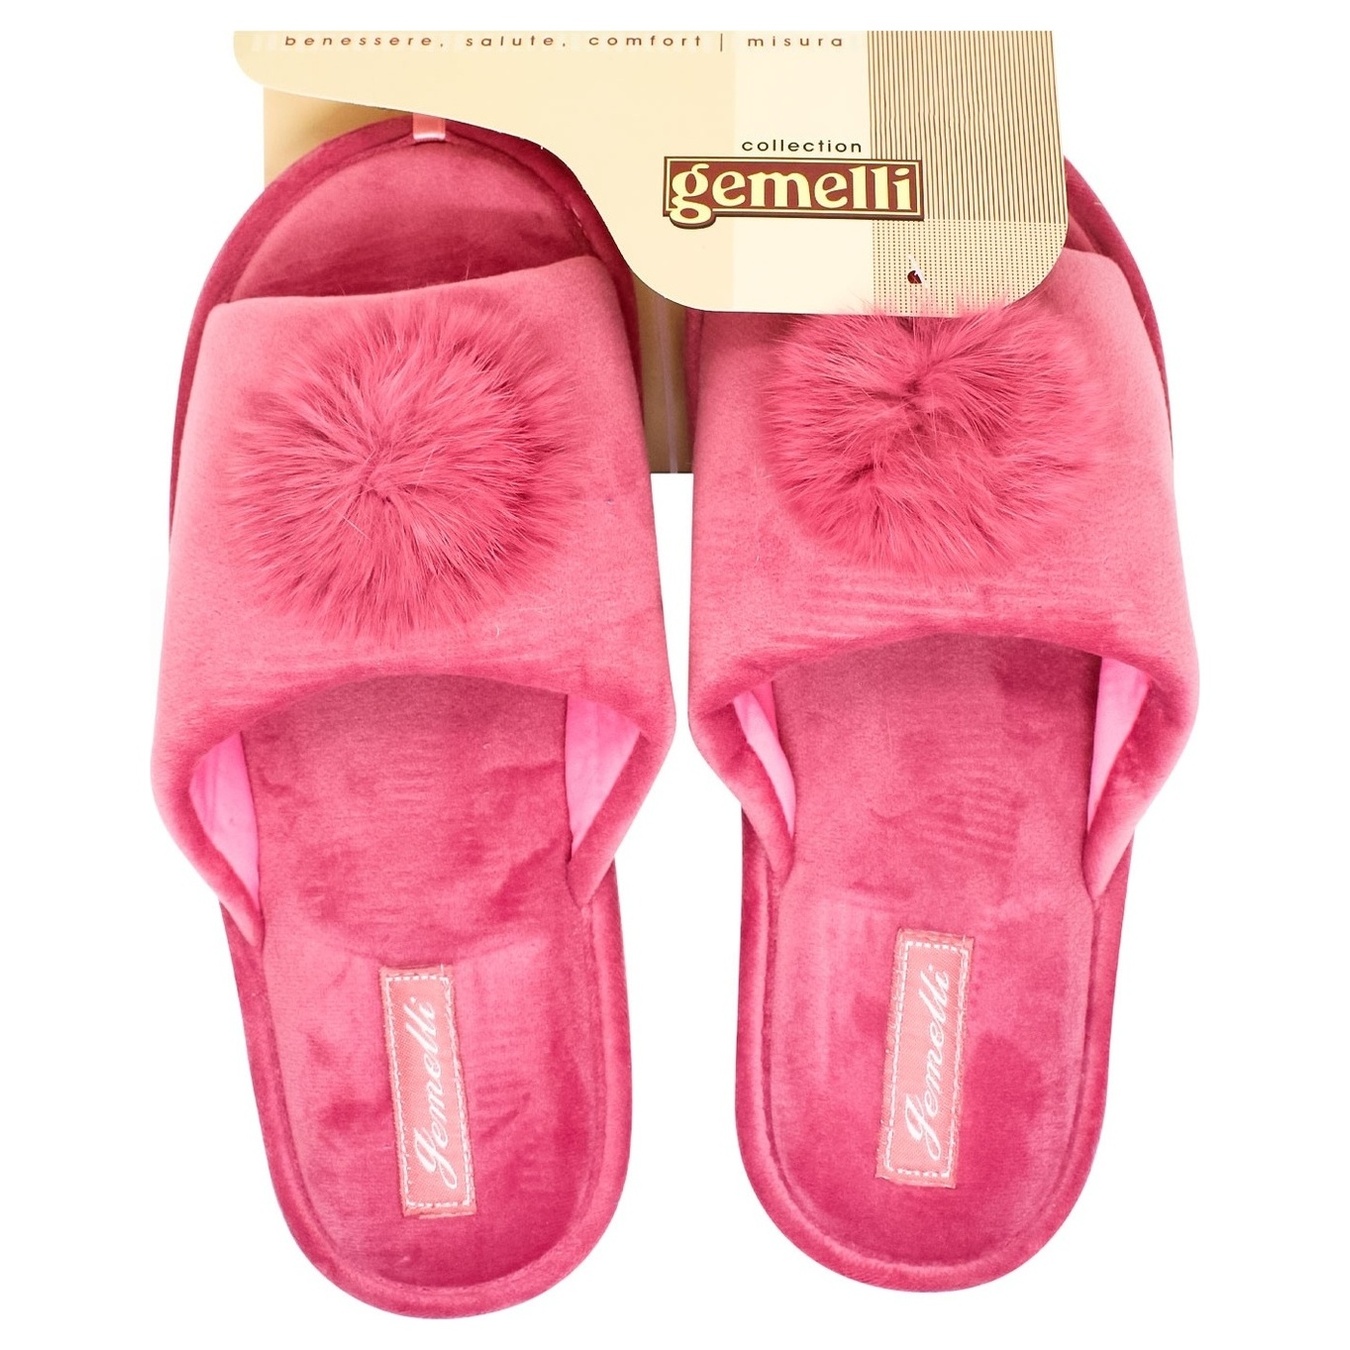 Gemelli Pukhnastyk home shoes for women 36-41 years old.